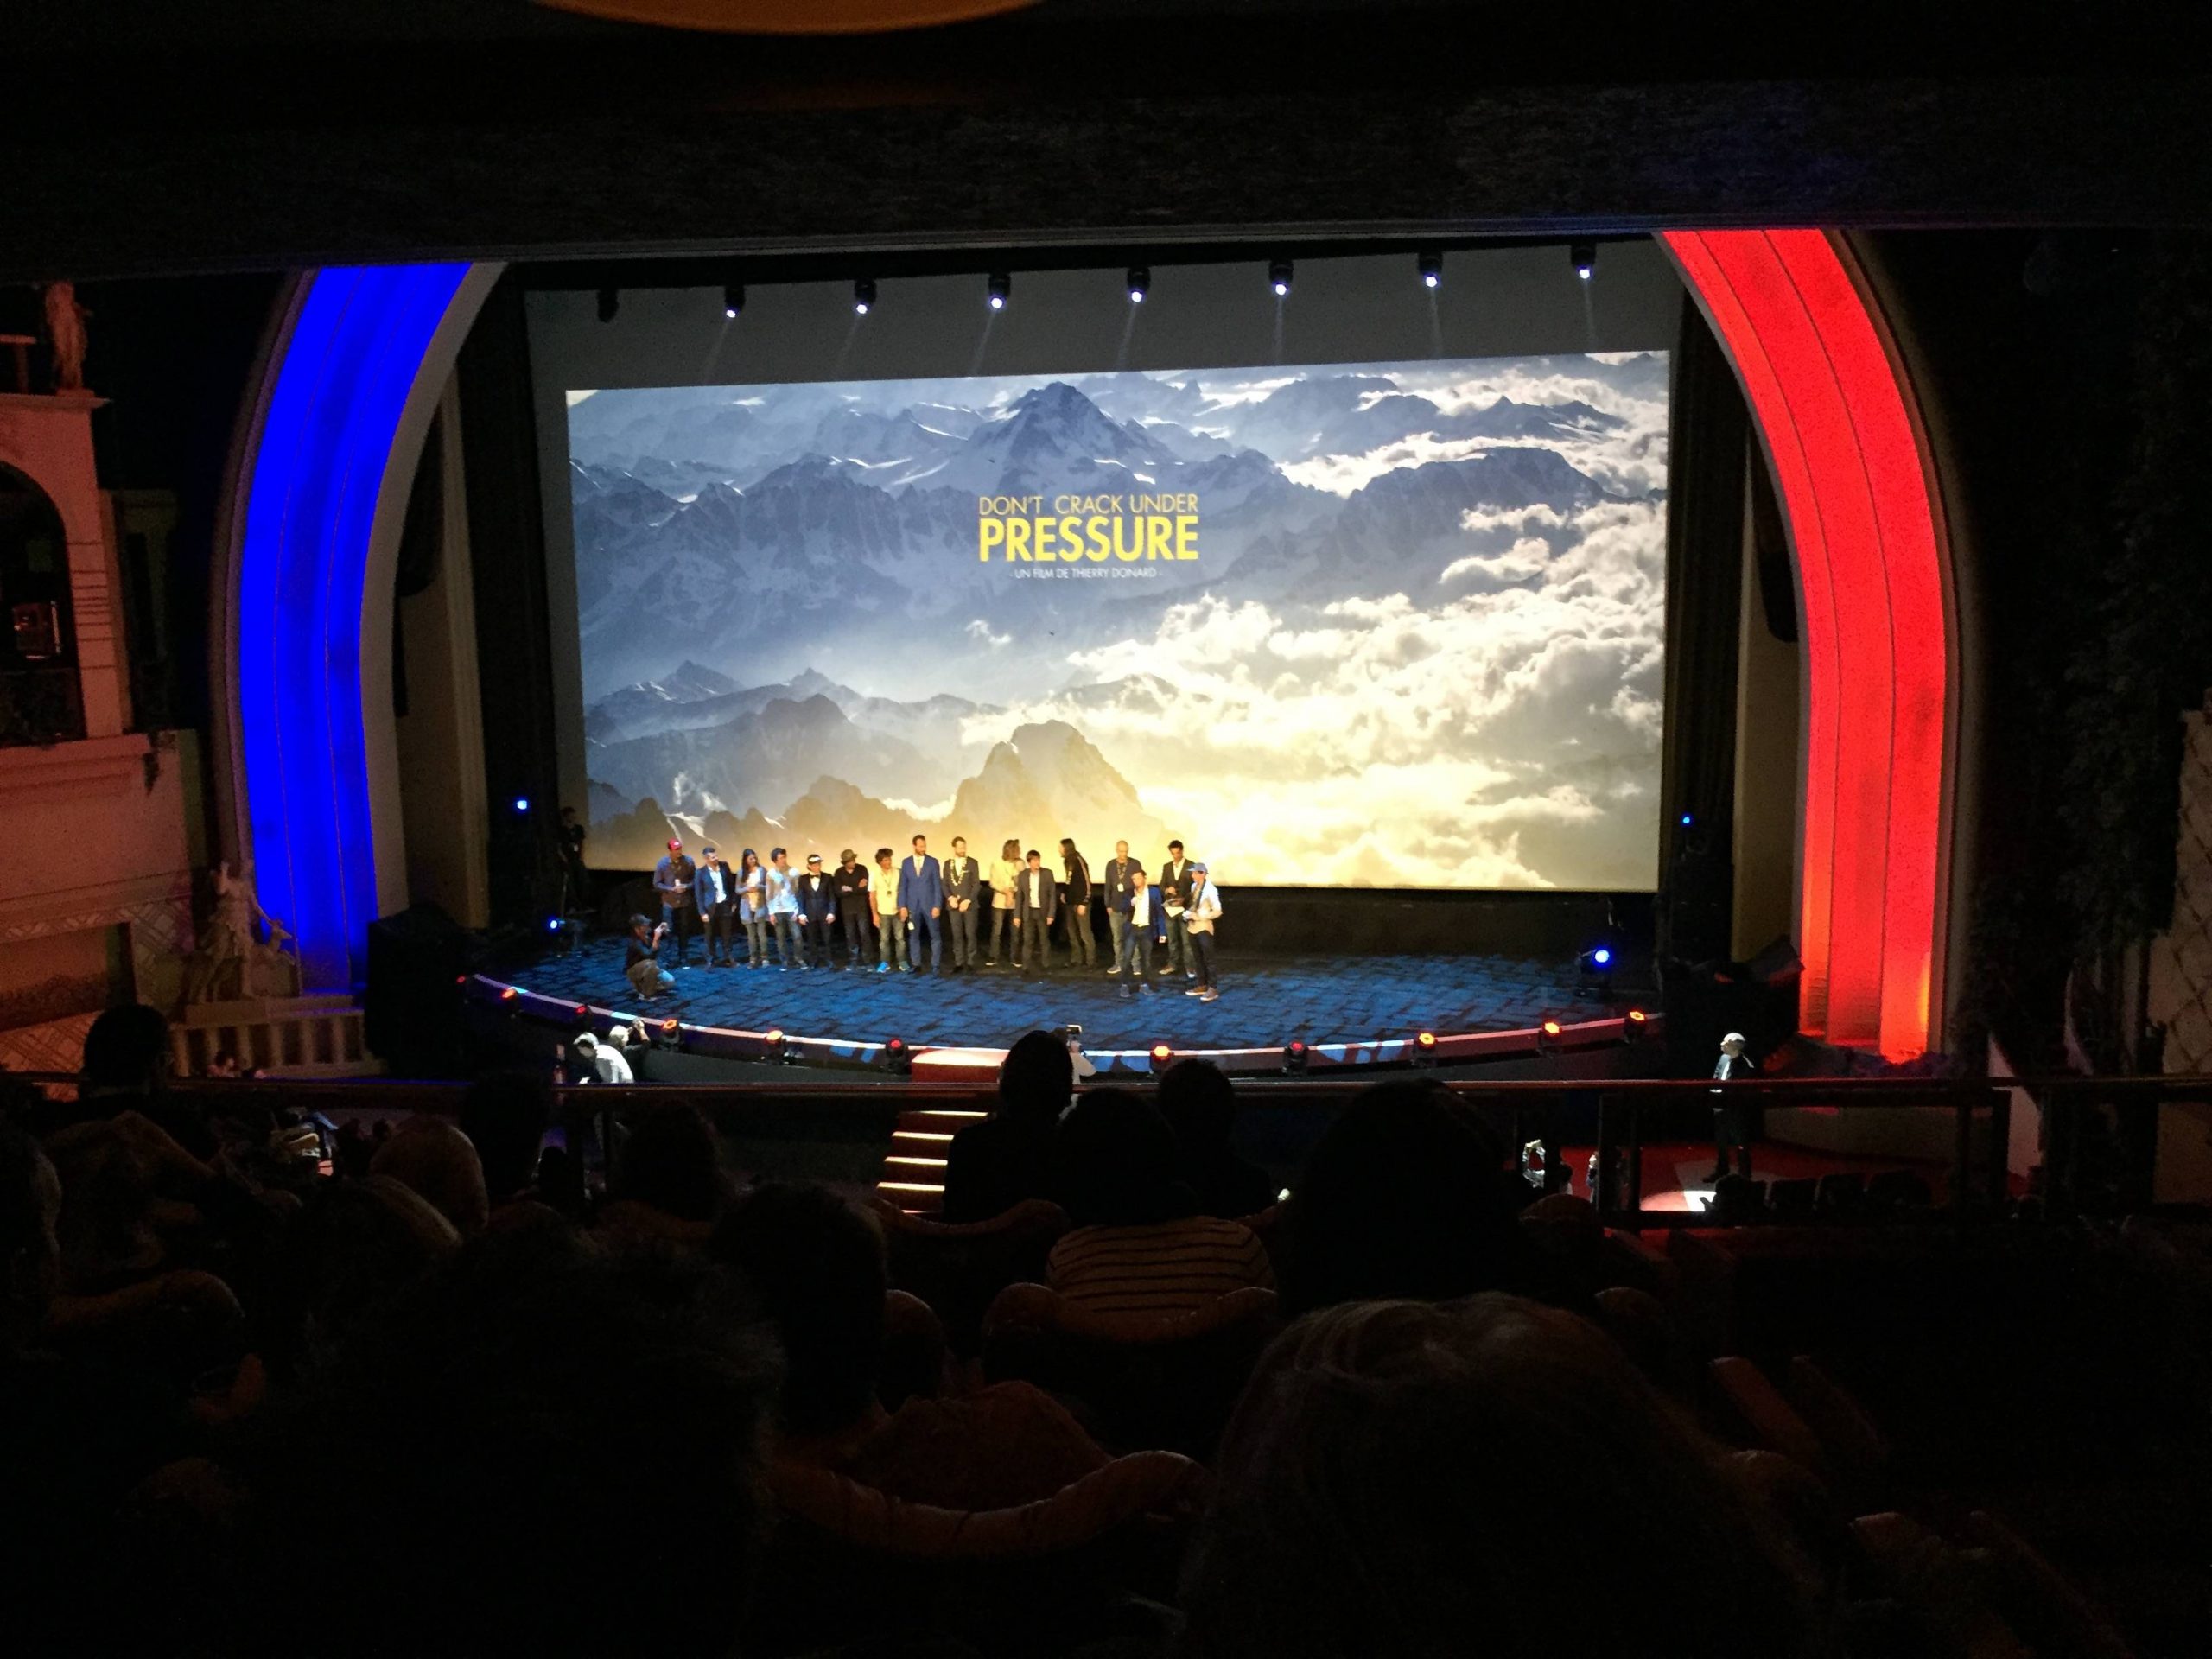 The athletes on stage after the film